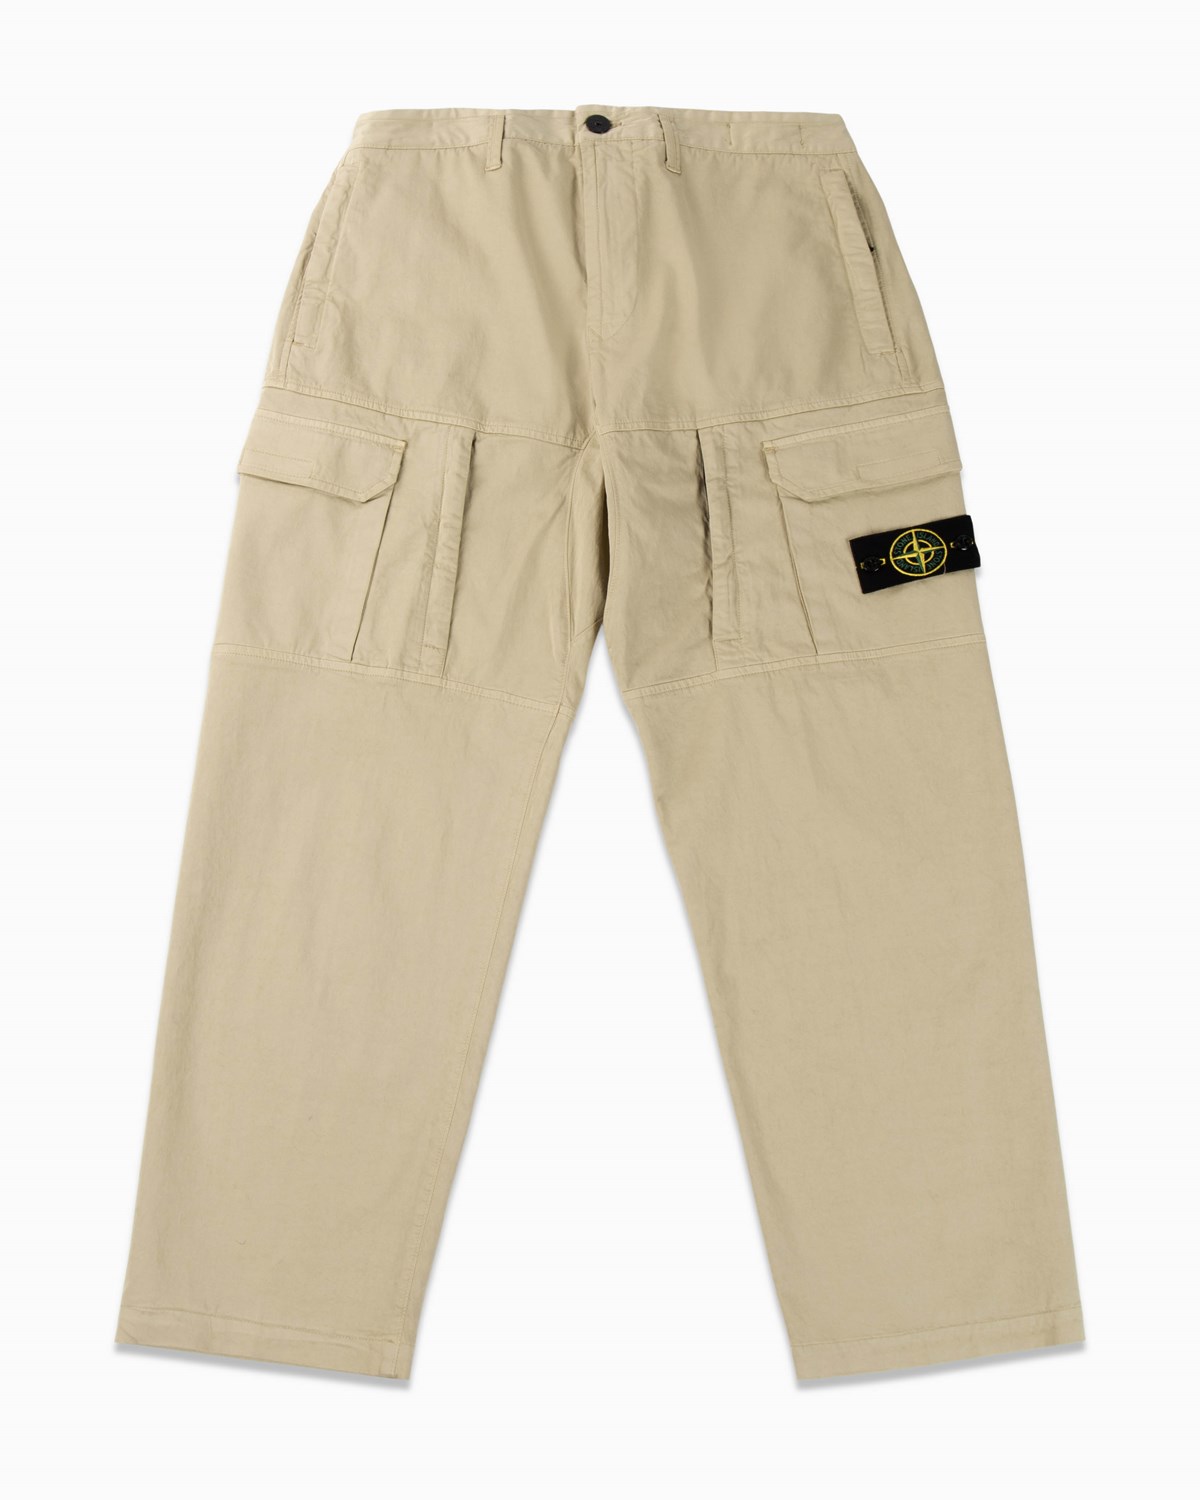 Men's Utility Cargo Pants for Work and Adventure